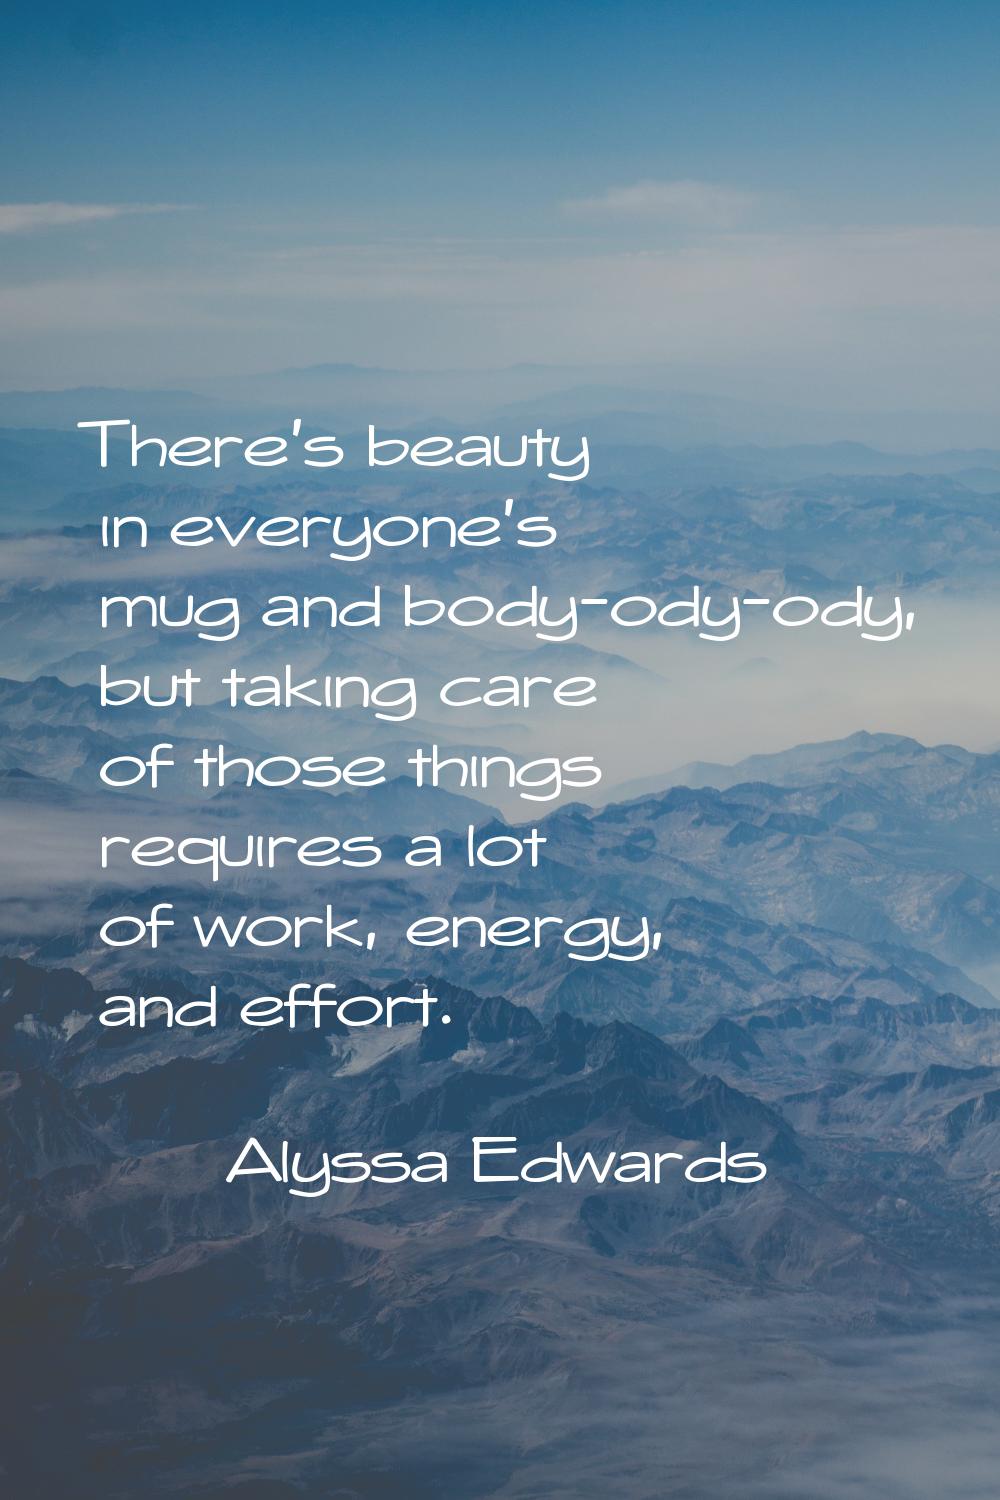 There's beauty in everyone's mug and body-ody-ody, but taking care of those things requires a lot o